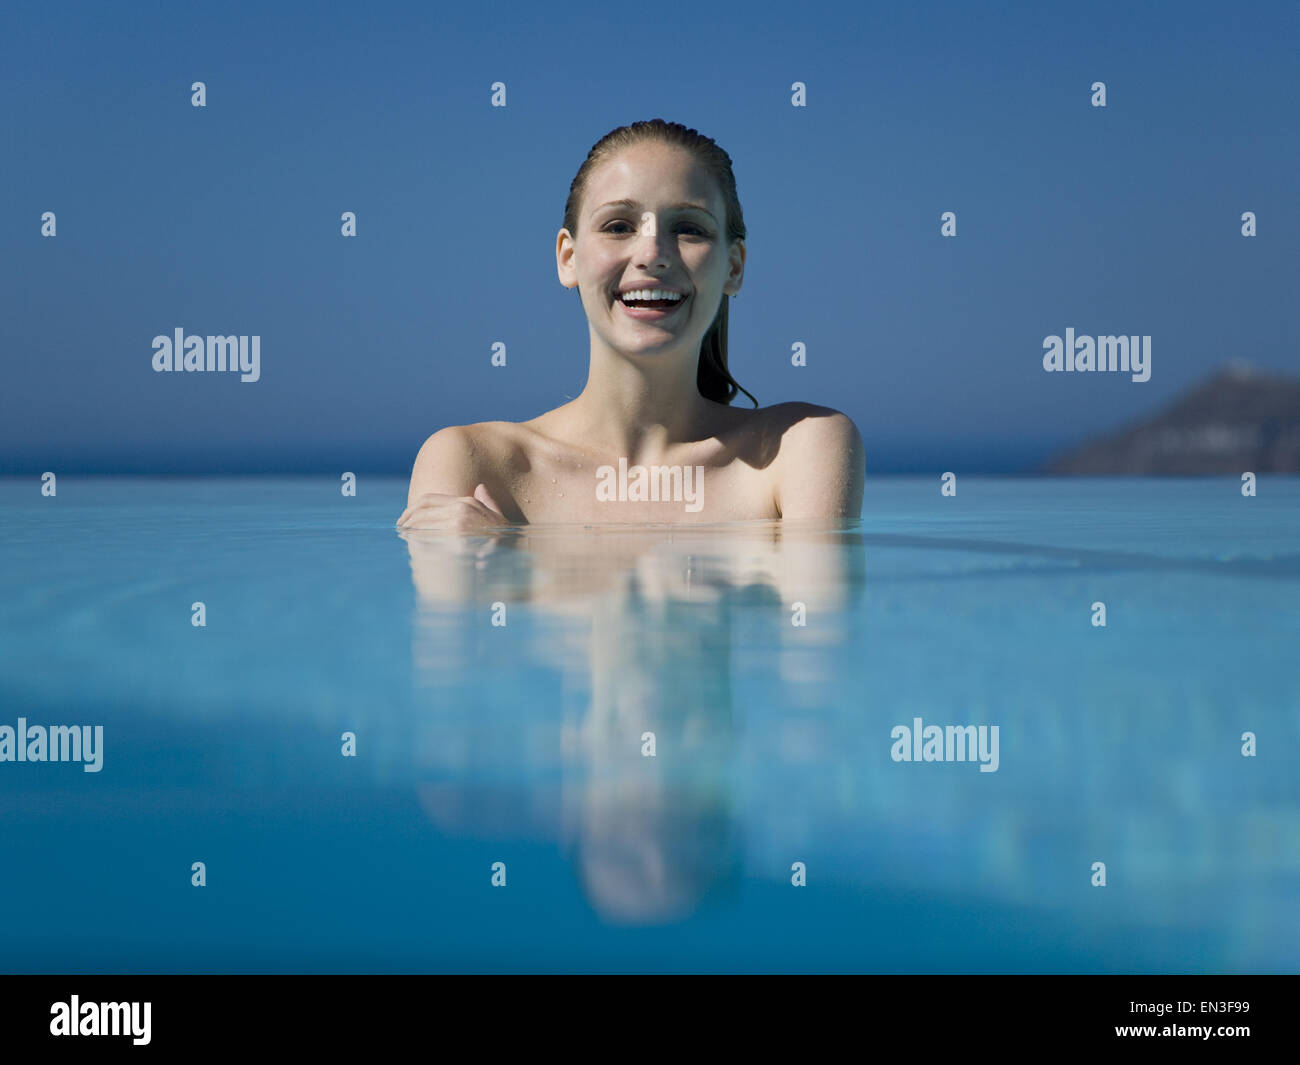 Woman in outdoor pool smiling Stock Photo